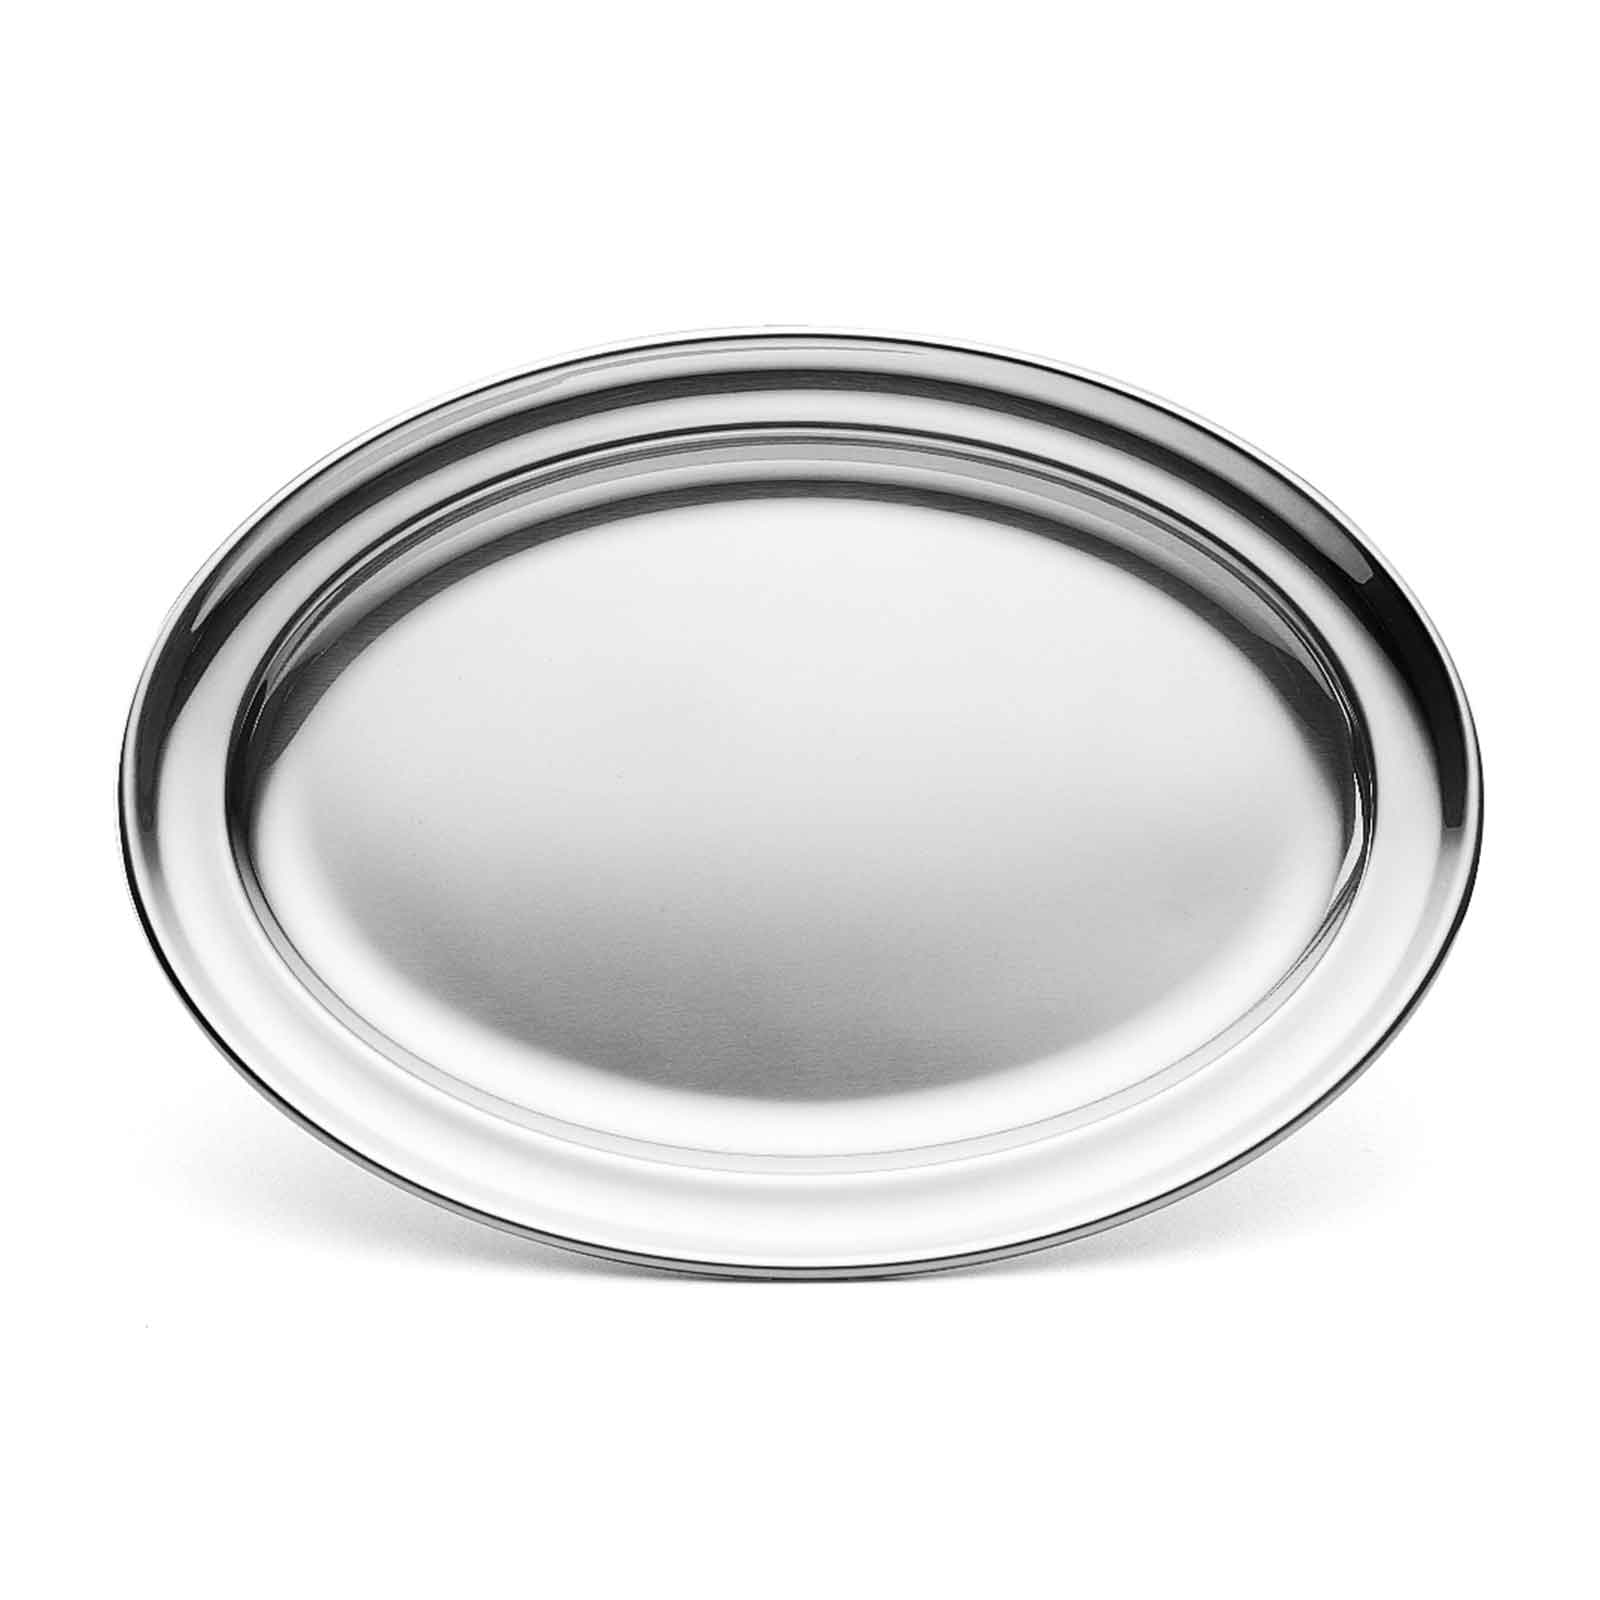 Walco Stainless O-U14 Tray, Serving